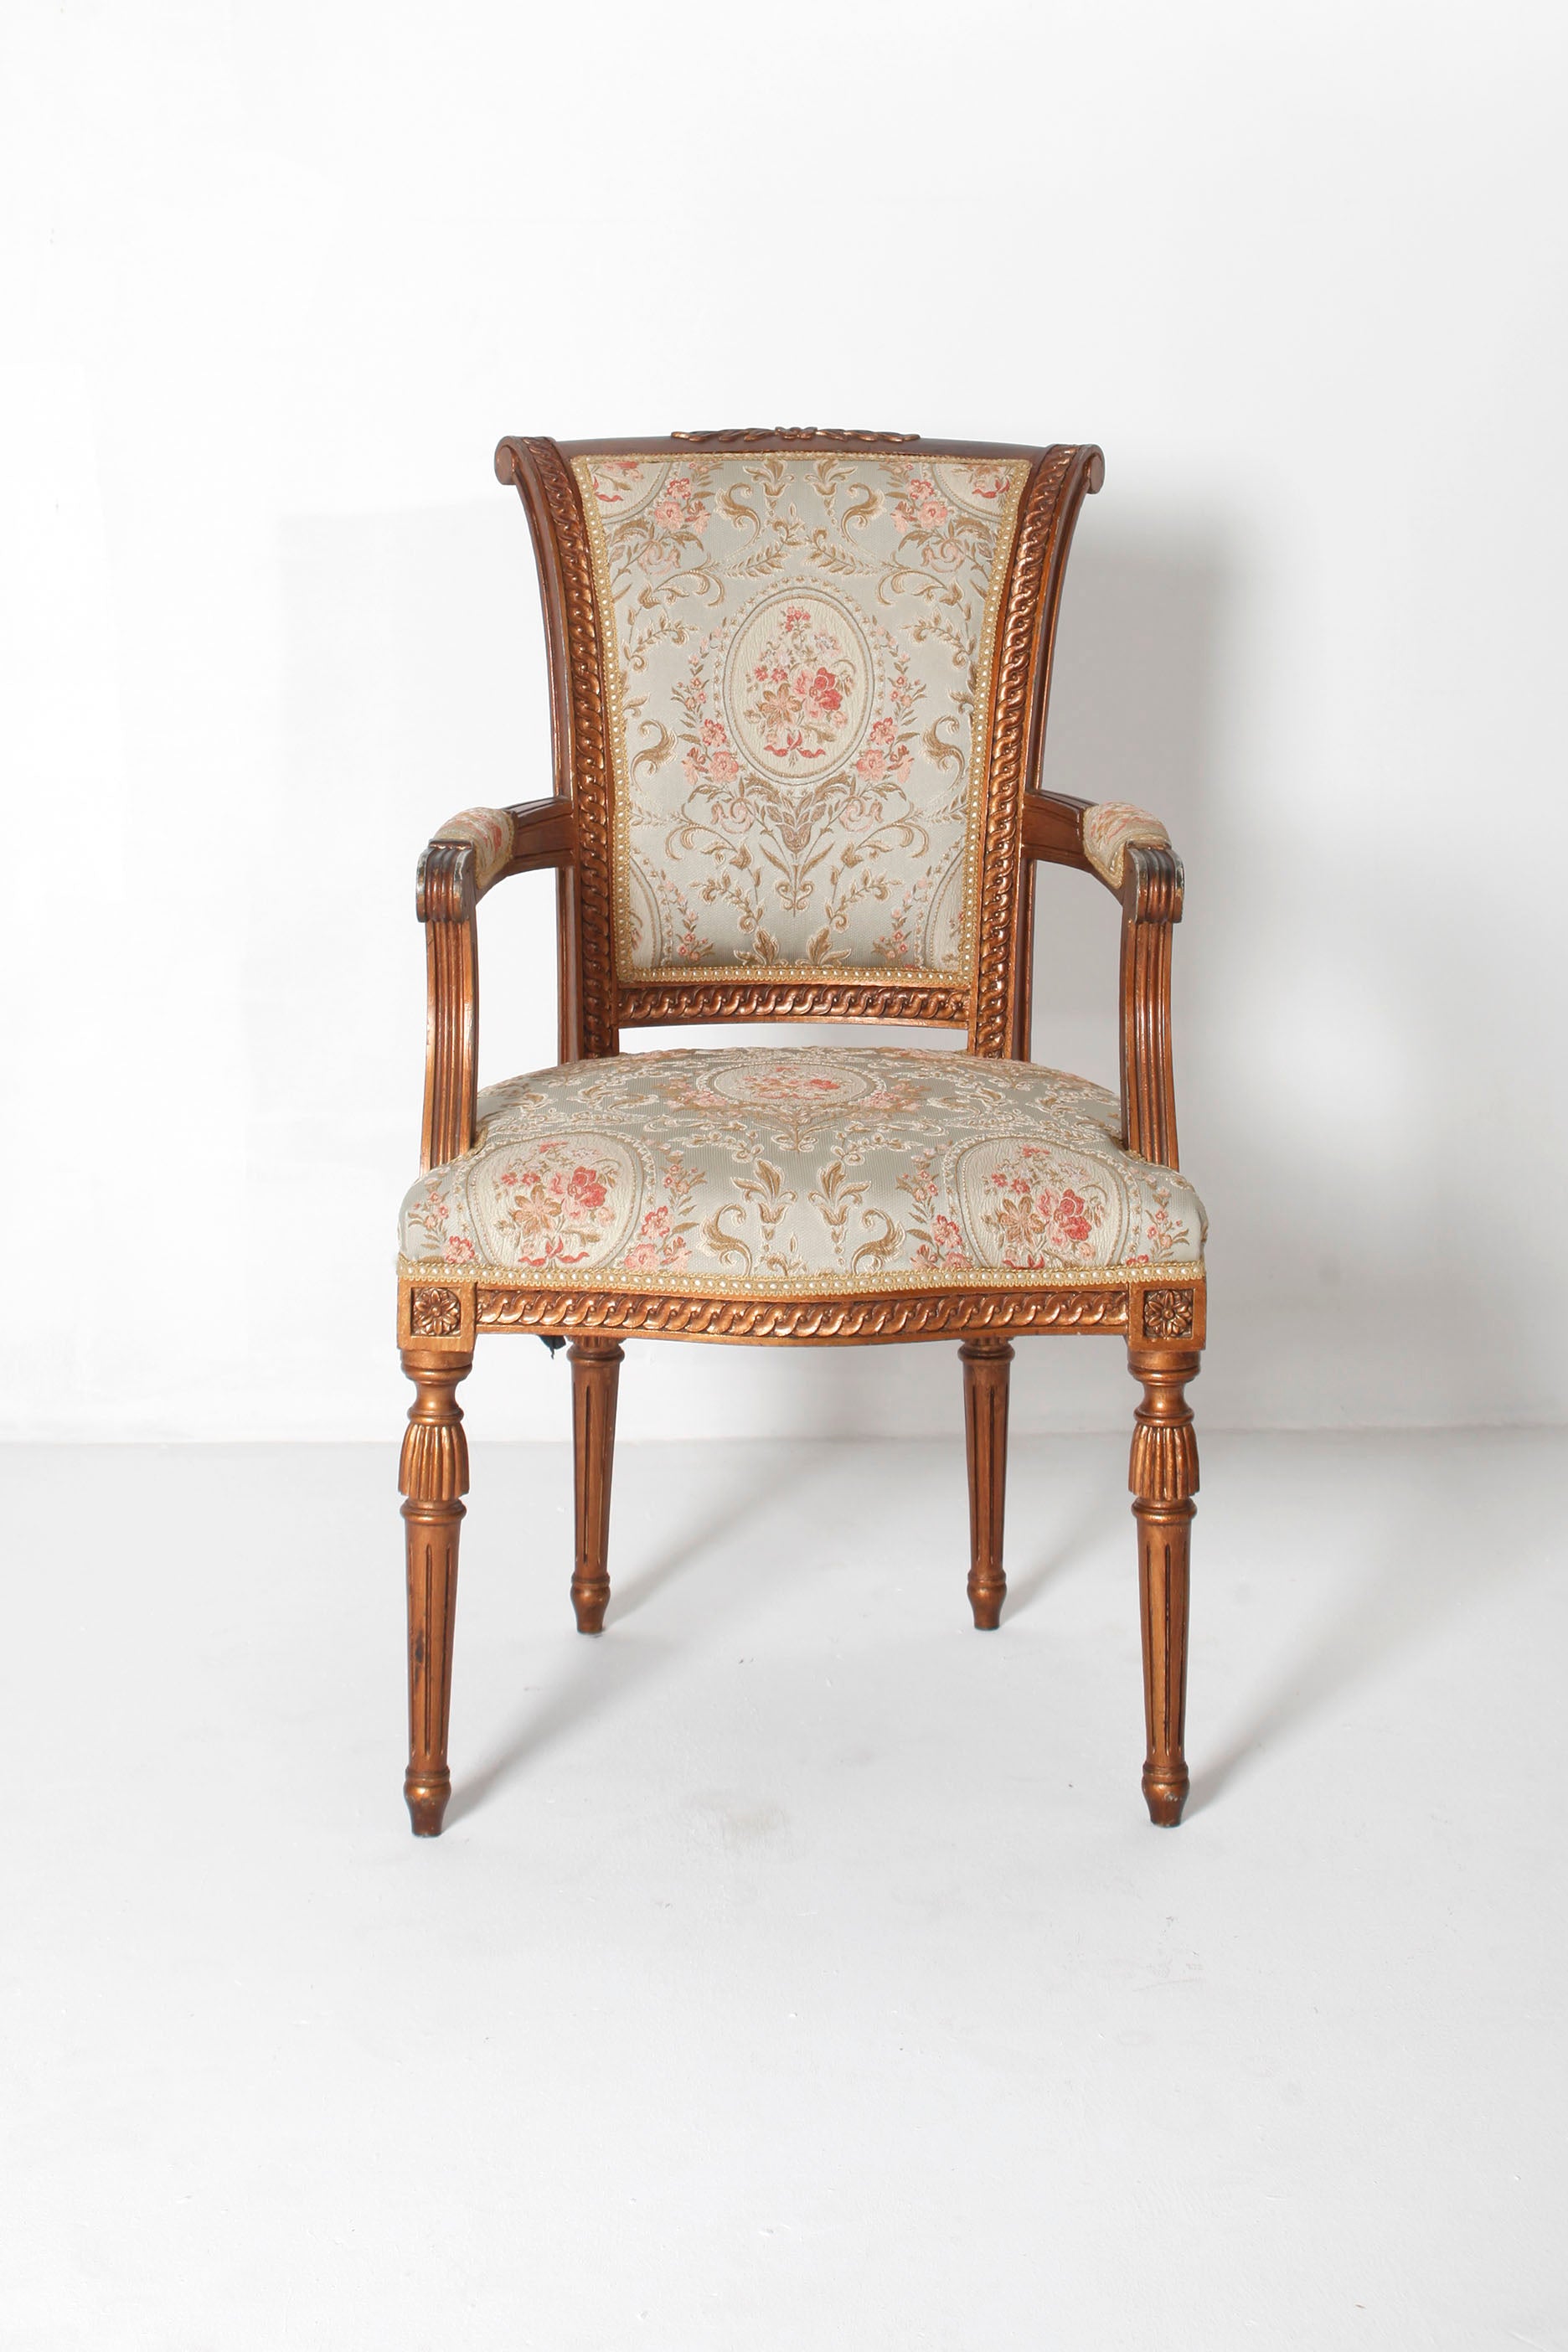 Wooden Baroque Style Jacquard Chair (5 pieces available)